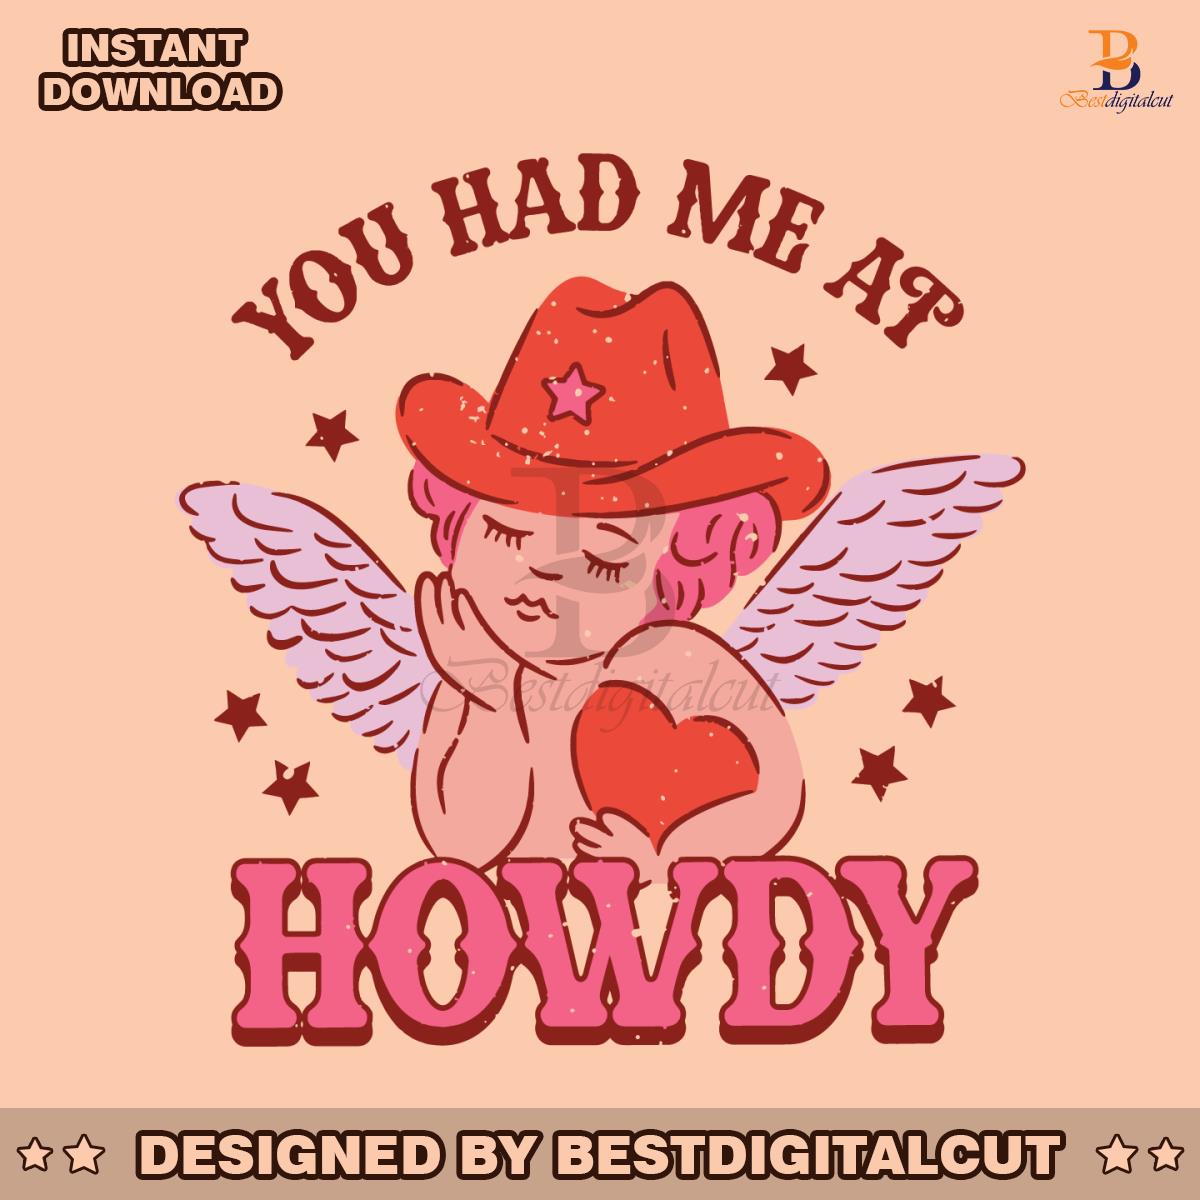 cupid-you-had-me-at-howdy-svg